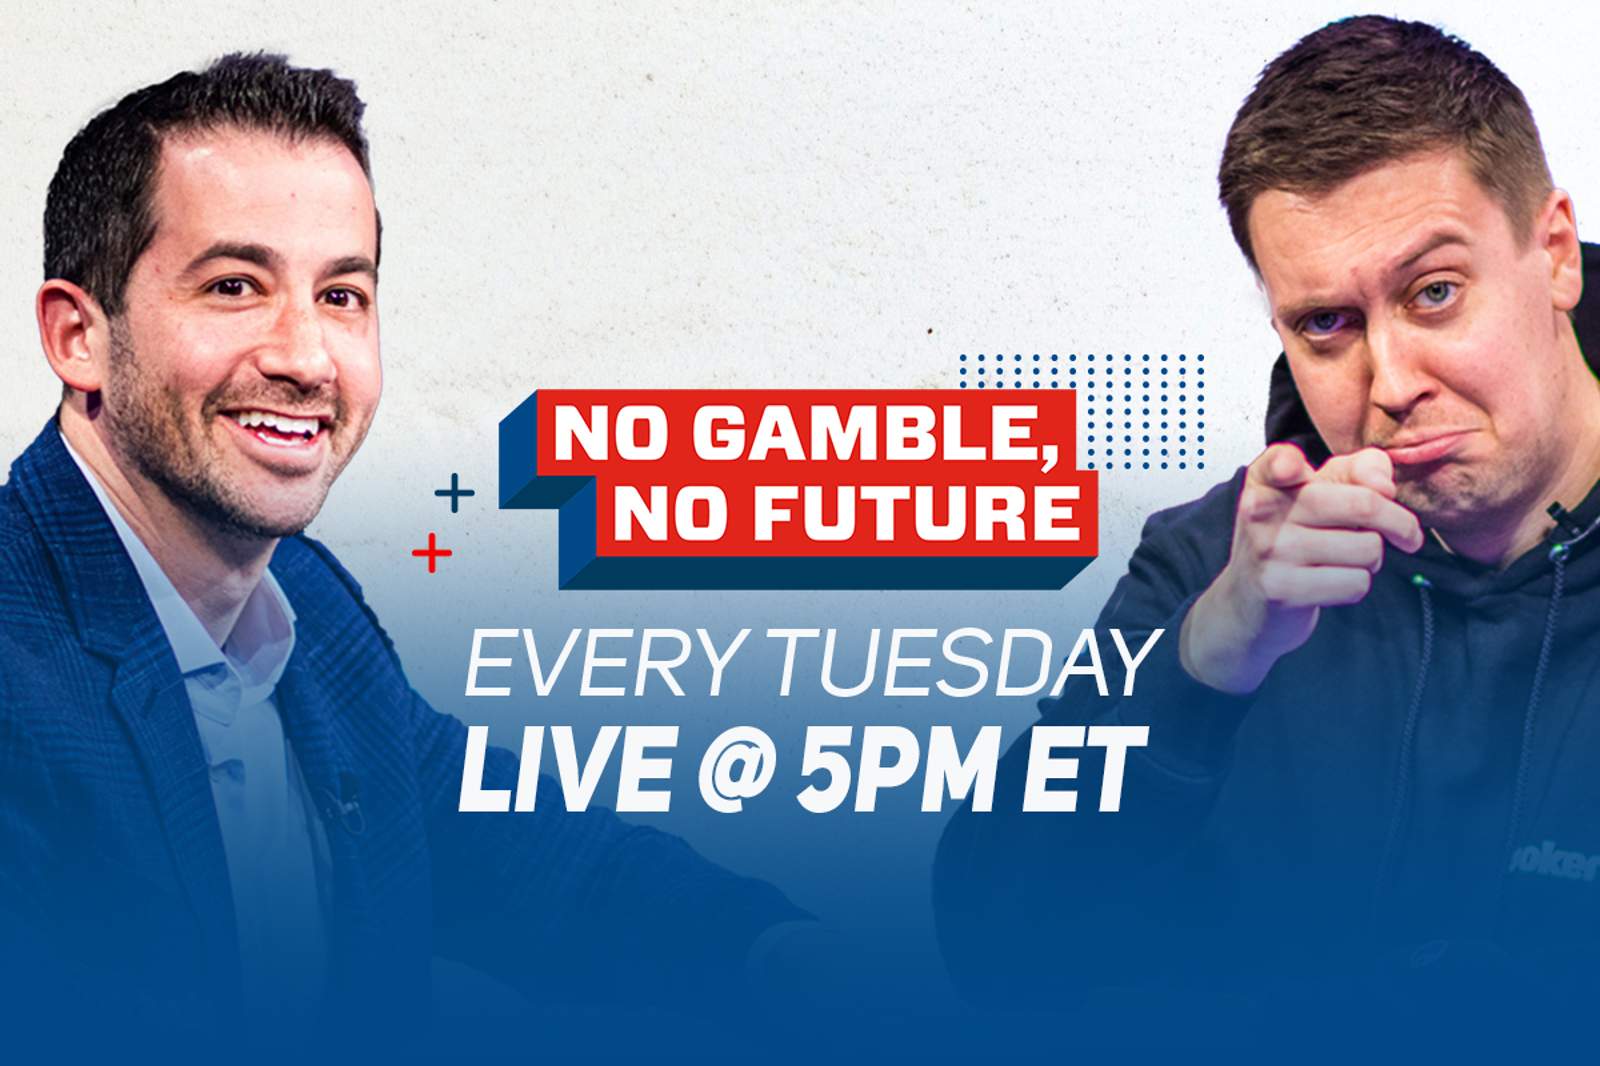 No Gamble, No Future Episode 12 on Today at 5 p.m. ET with Phil Hellmuth and Daniel Negreanu